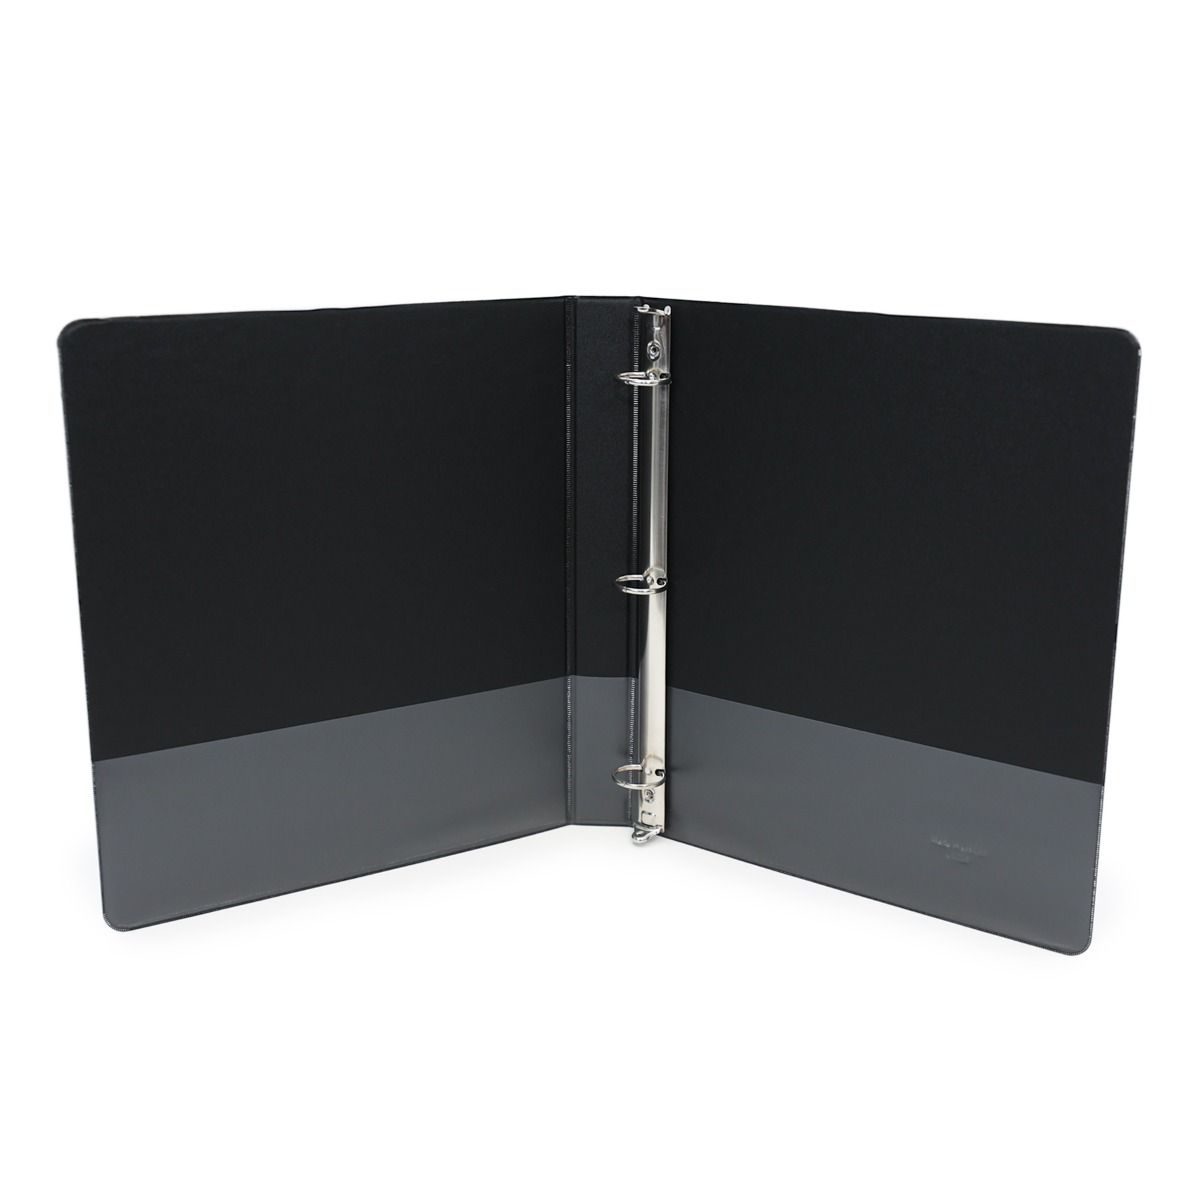 Buy Black Letter Size Clear View 3-Ring Binders Image 1